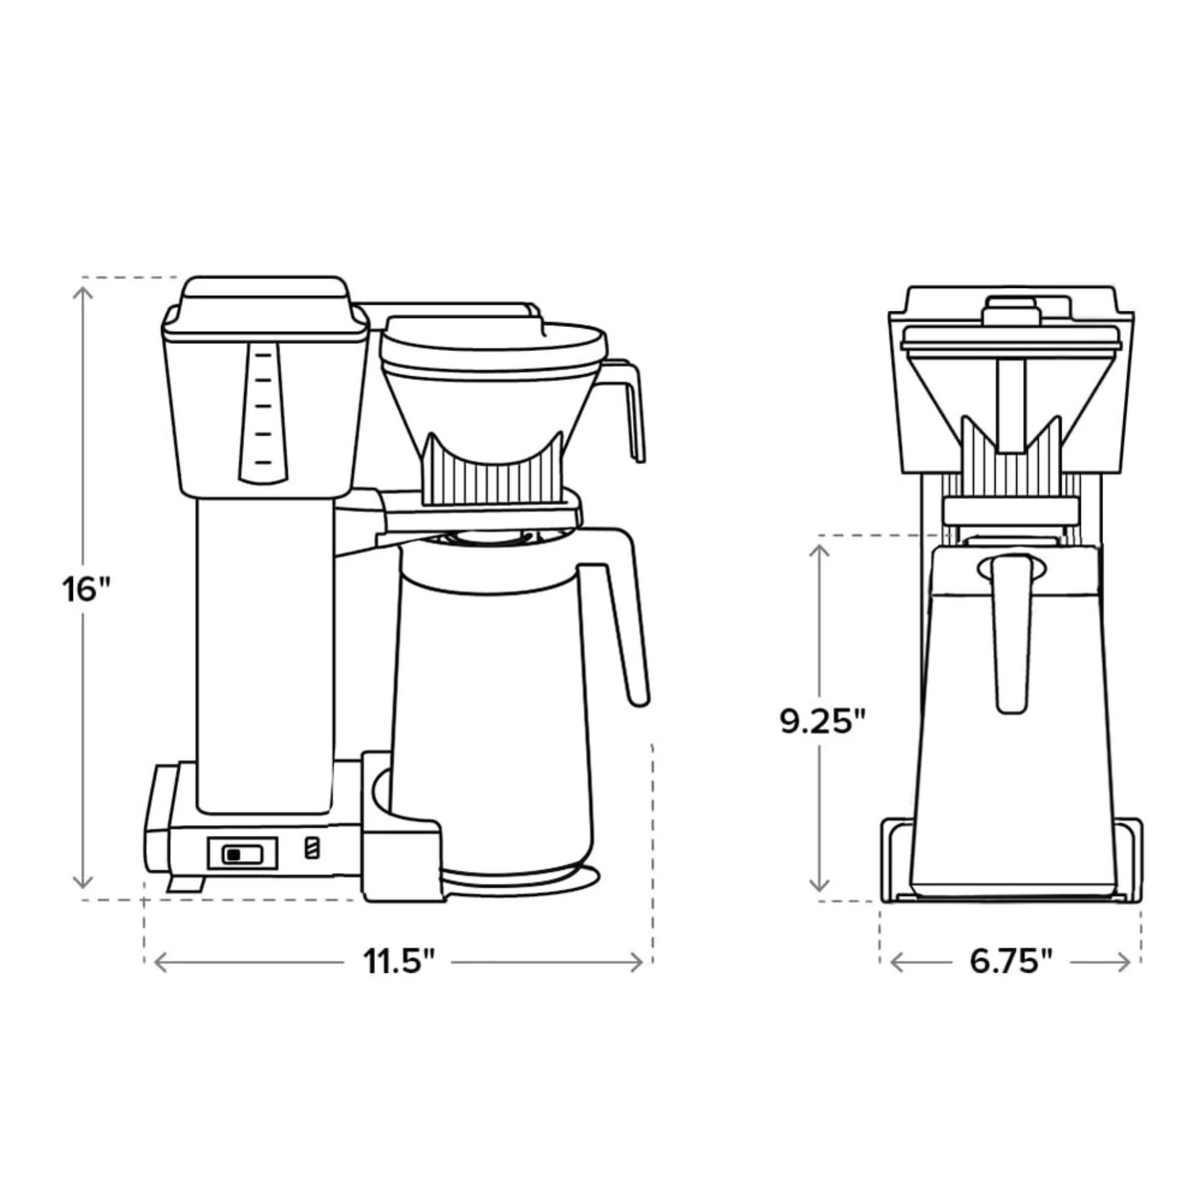 Moccamaster KBGT- Automatic Home Brewer